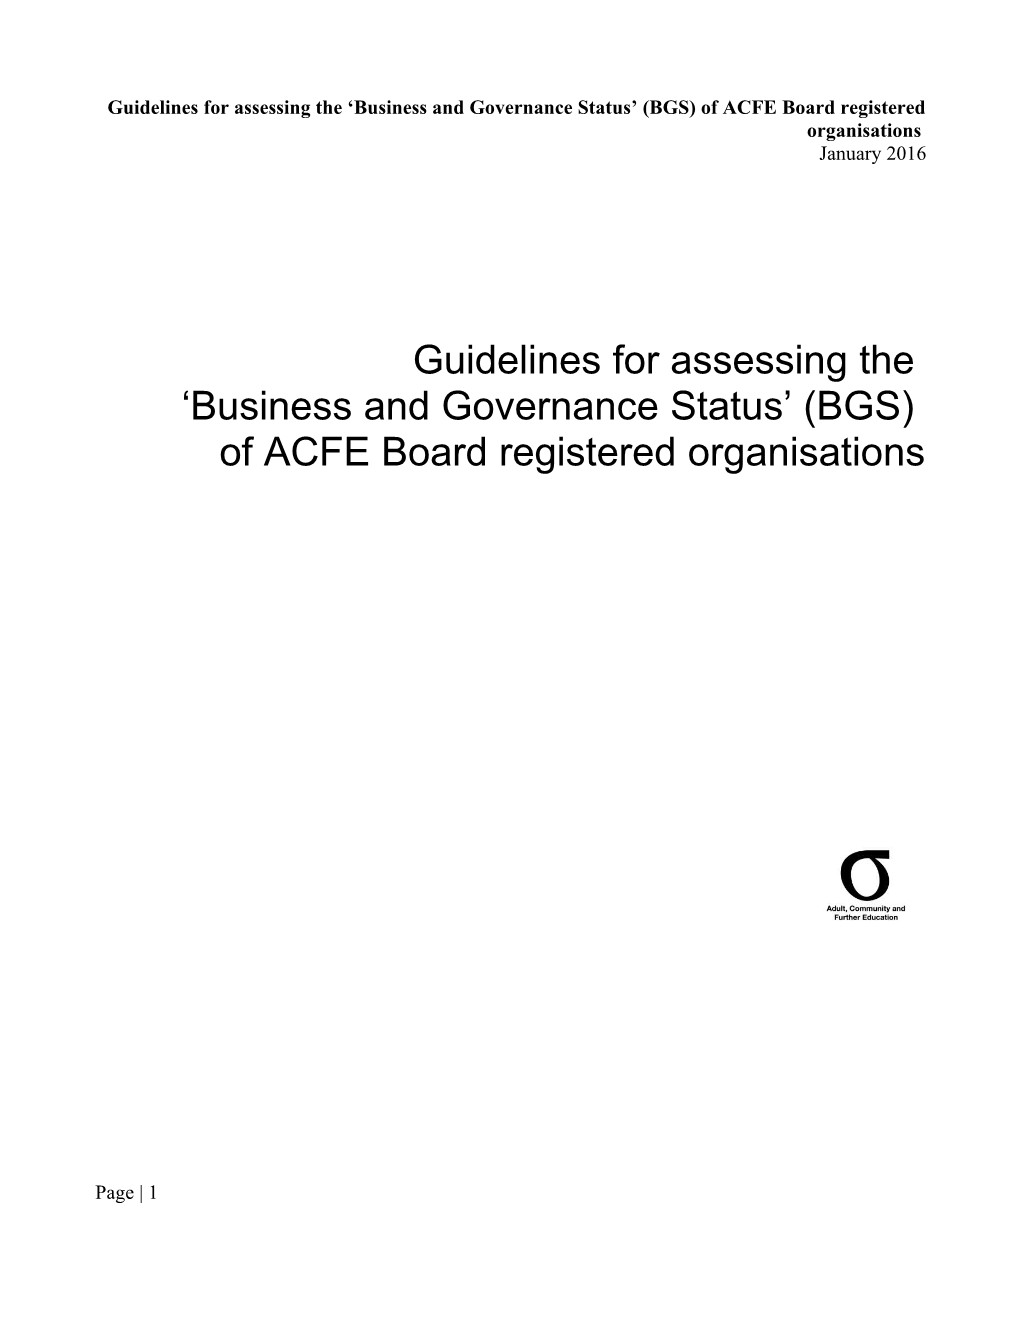 Guidelines for Assessing the Business and Governance Status (BGS) of ACFE Board Registered